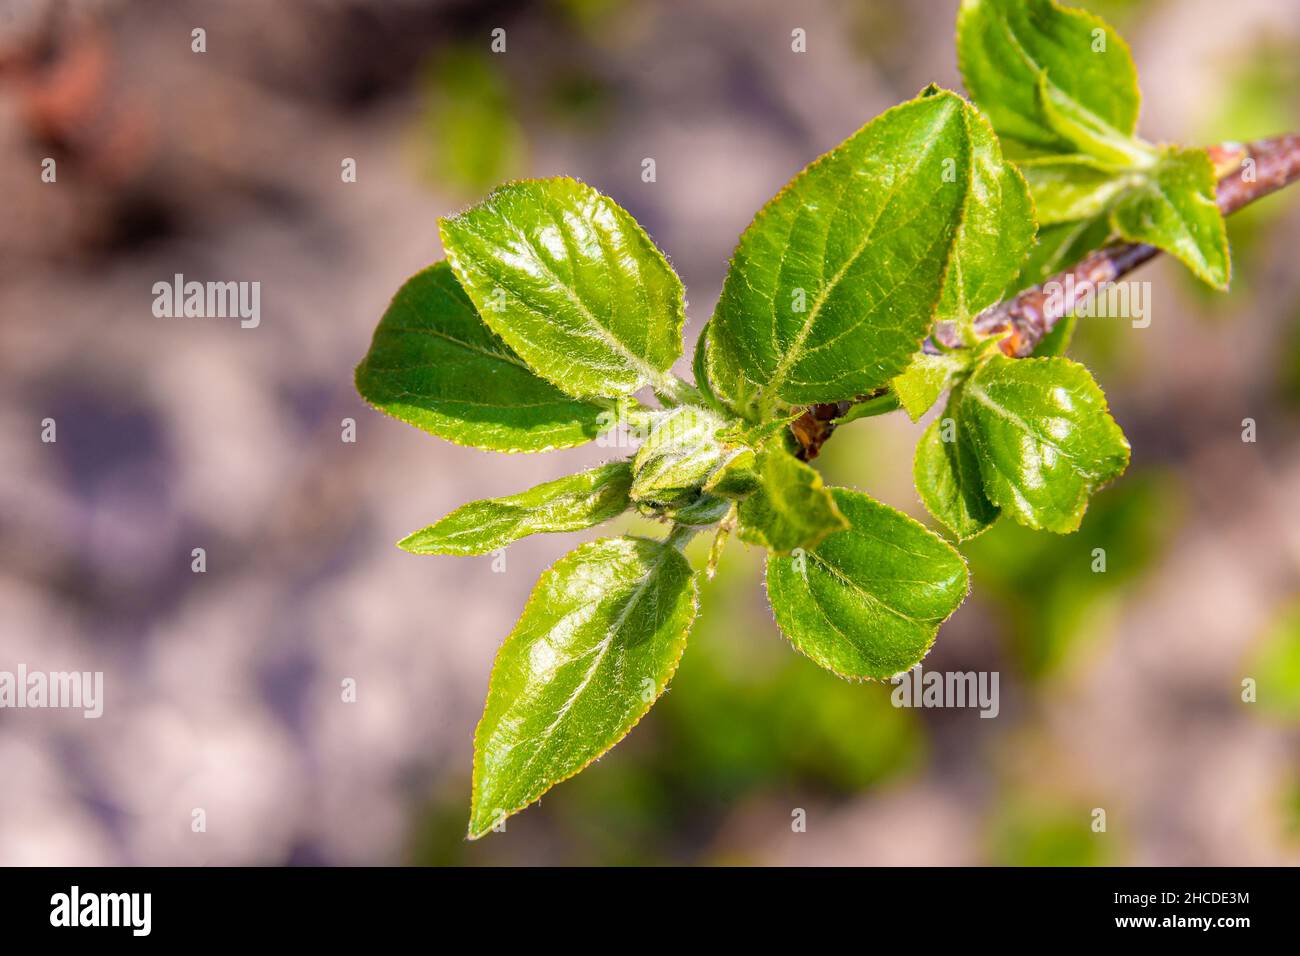 spring care of apple tree, time of feeding and protecting young shoots before bud formation, selective focus Stock Photo